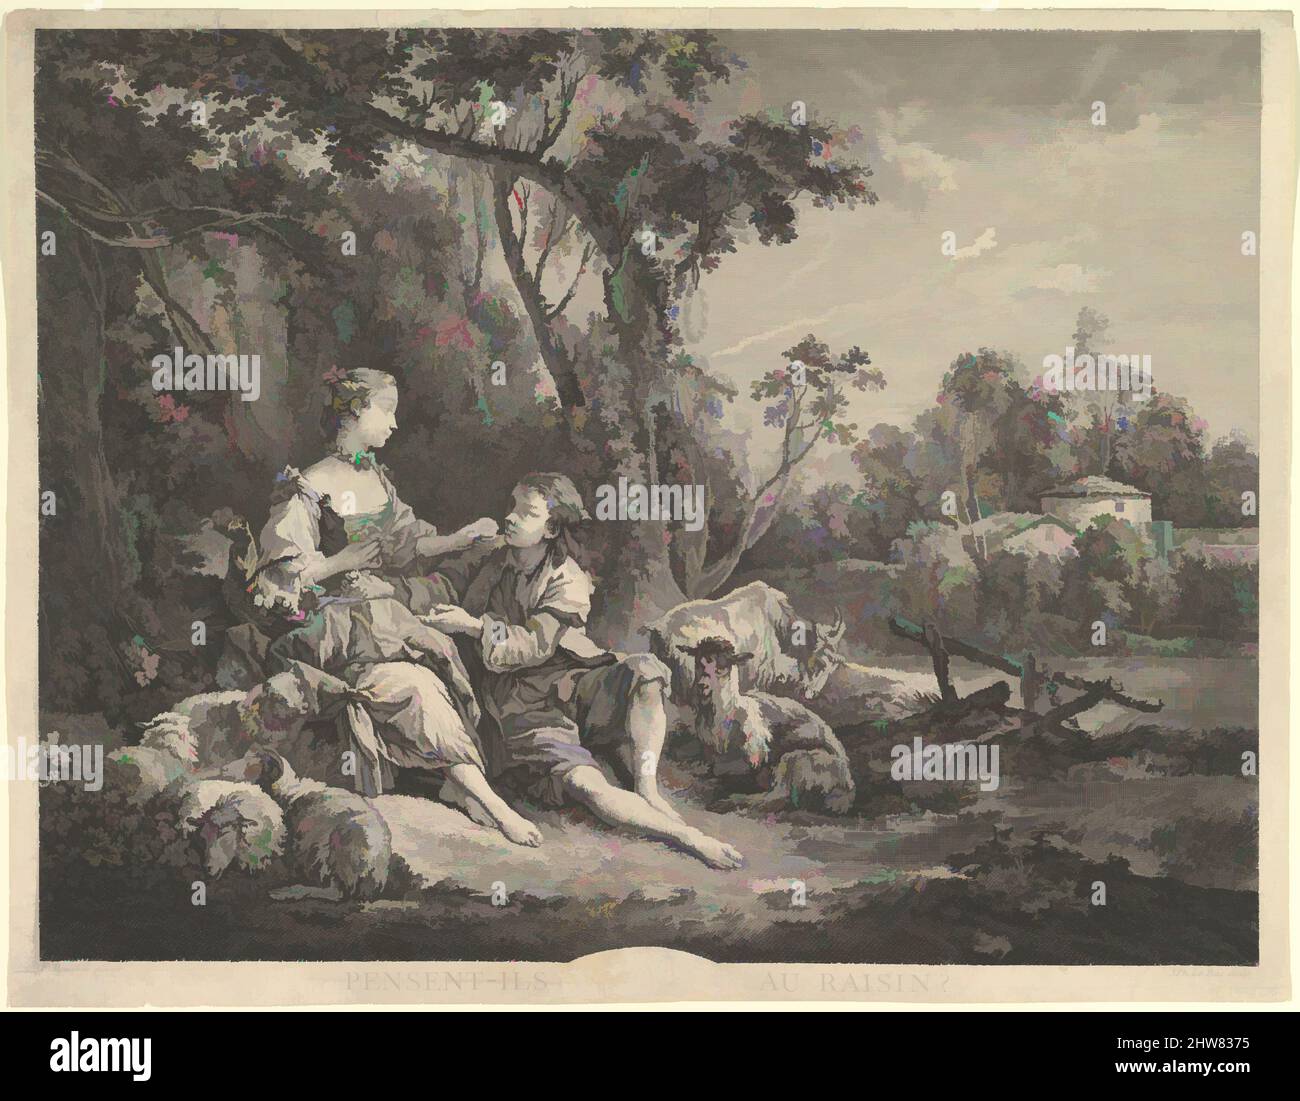 Art inspired by Pensant-ils au Raisin? (Are They Thinking About the Grape?), 18th century, Etching and engraving, Sheet: 14 1/8 x 18 1/8 in. (35.8 x 46 cm), Prints, Jacques Philippe Le Bas (French, Paris 1707–1783 Paris), After François Boucher (French, Paris 1703–1770 Paris, Classic works modernized by Artotop with a splash of modernity. Shapes, color and value, eye-catching visual impact on art. Emotions through freedom of artworks in a contemporary way. A timeless message pursuing a wildly creative new direction. Artists turning to the digital medium and creating the Artotop NFT Stock Photo